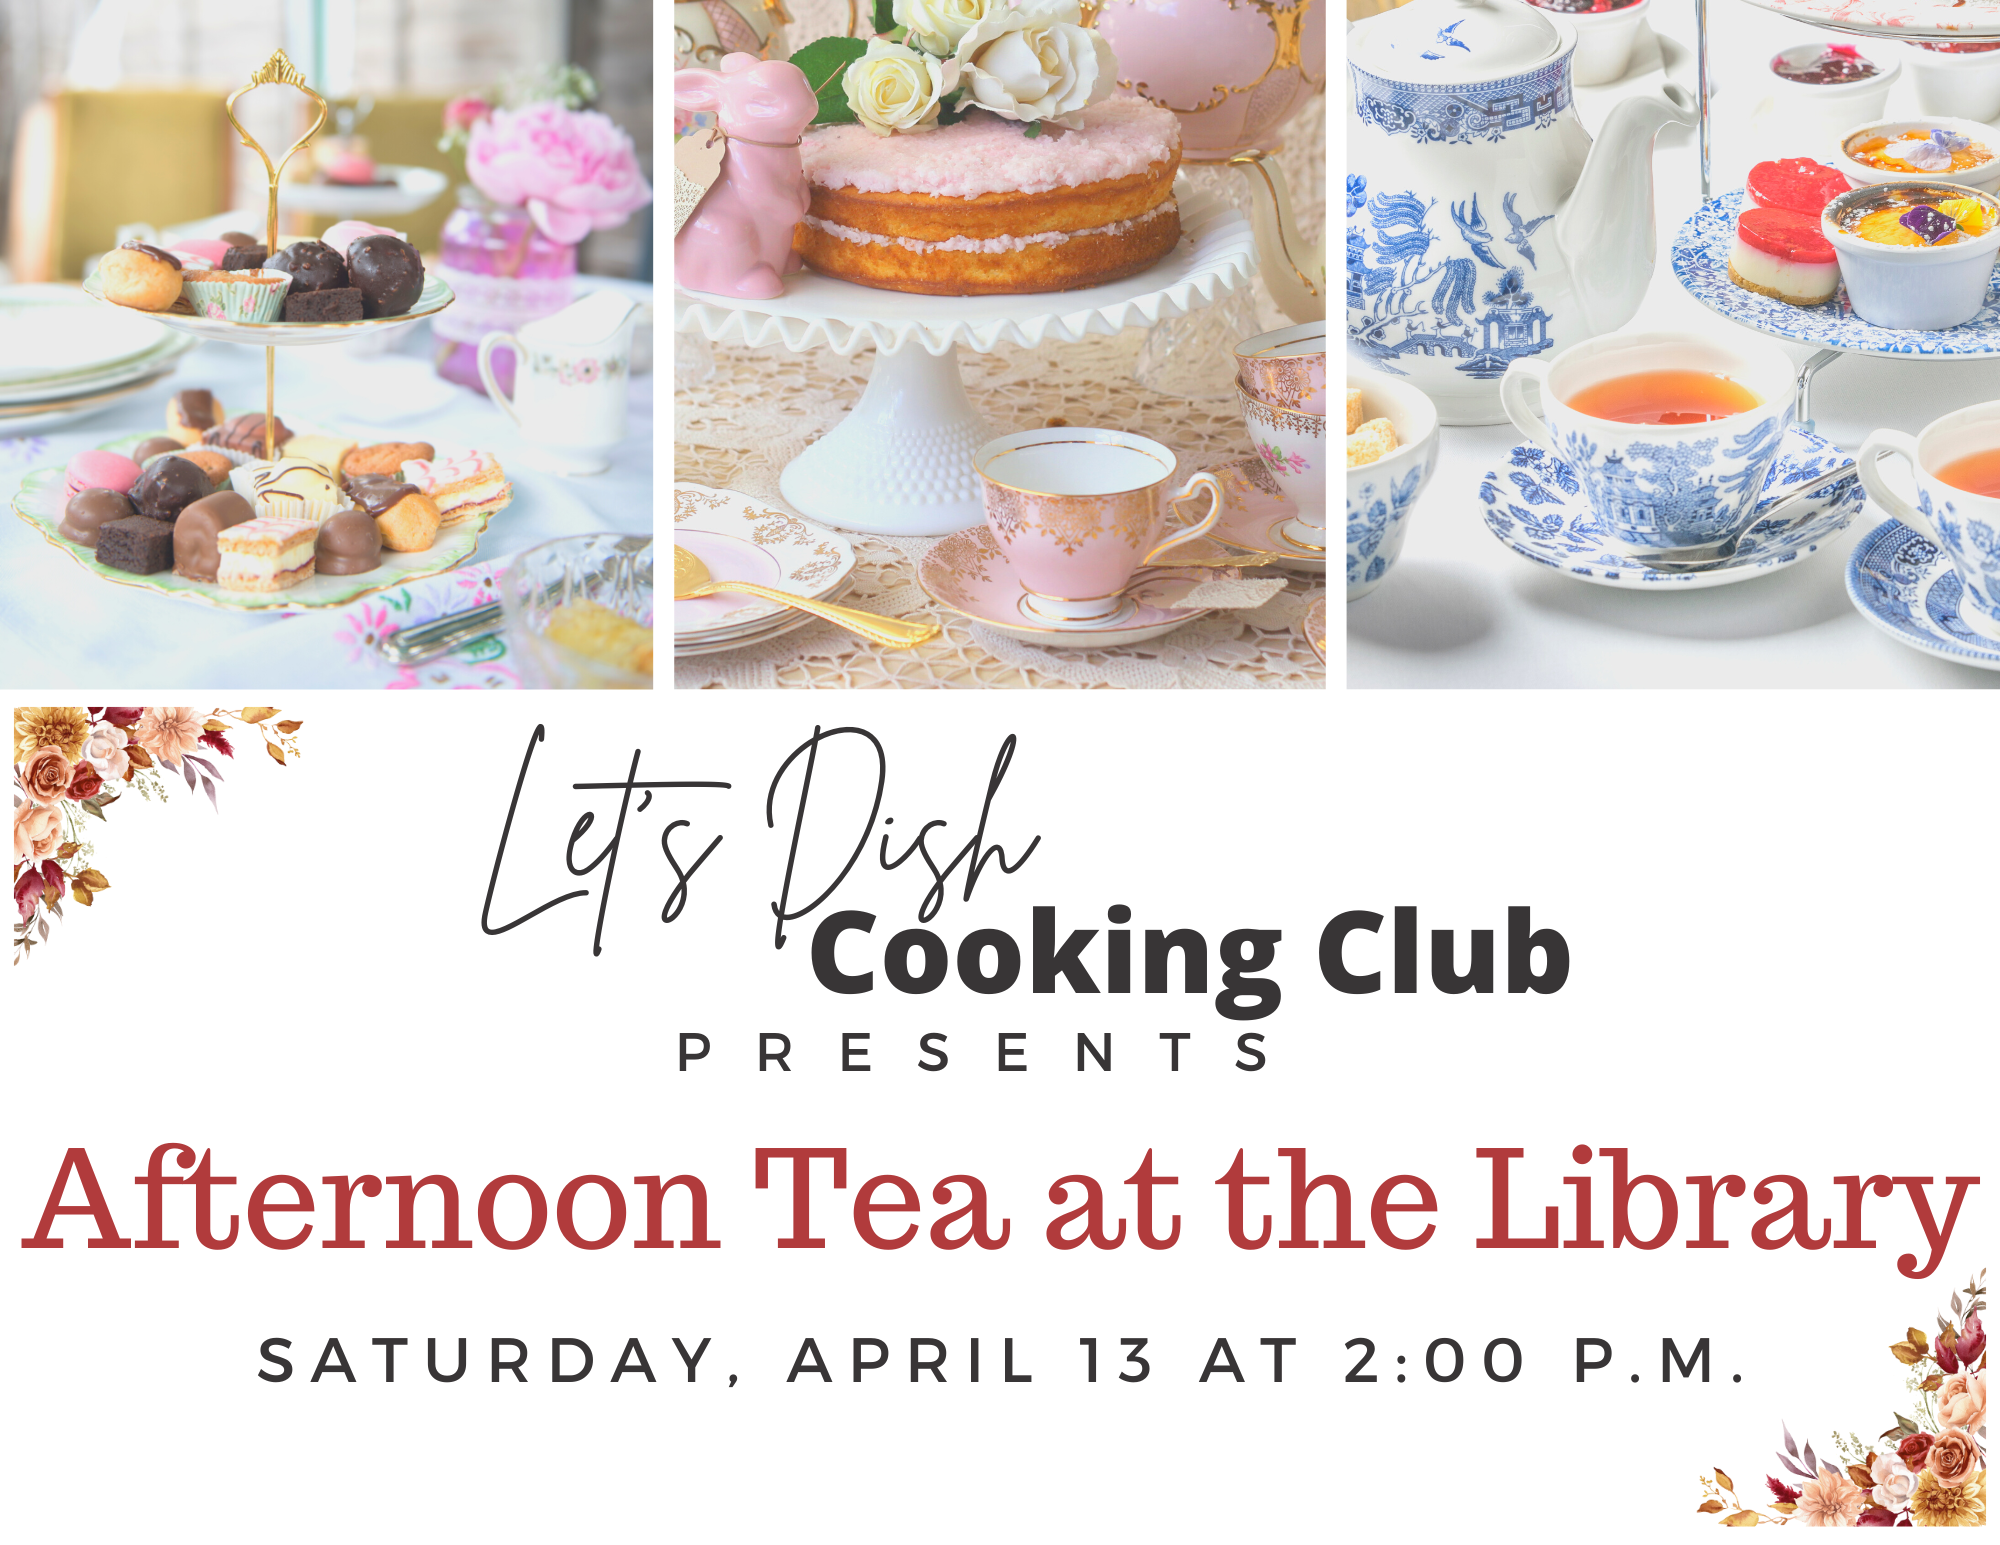 Tea party images with cake, finger foods and tea. Text: Let's Dish Cooking Club presents Afternoon Tea at the Library